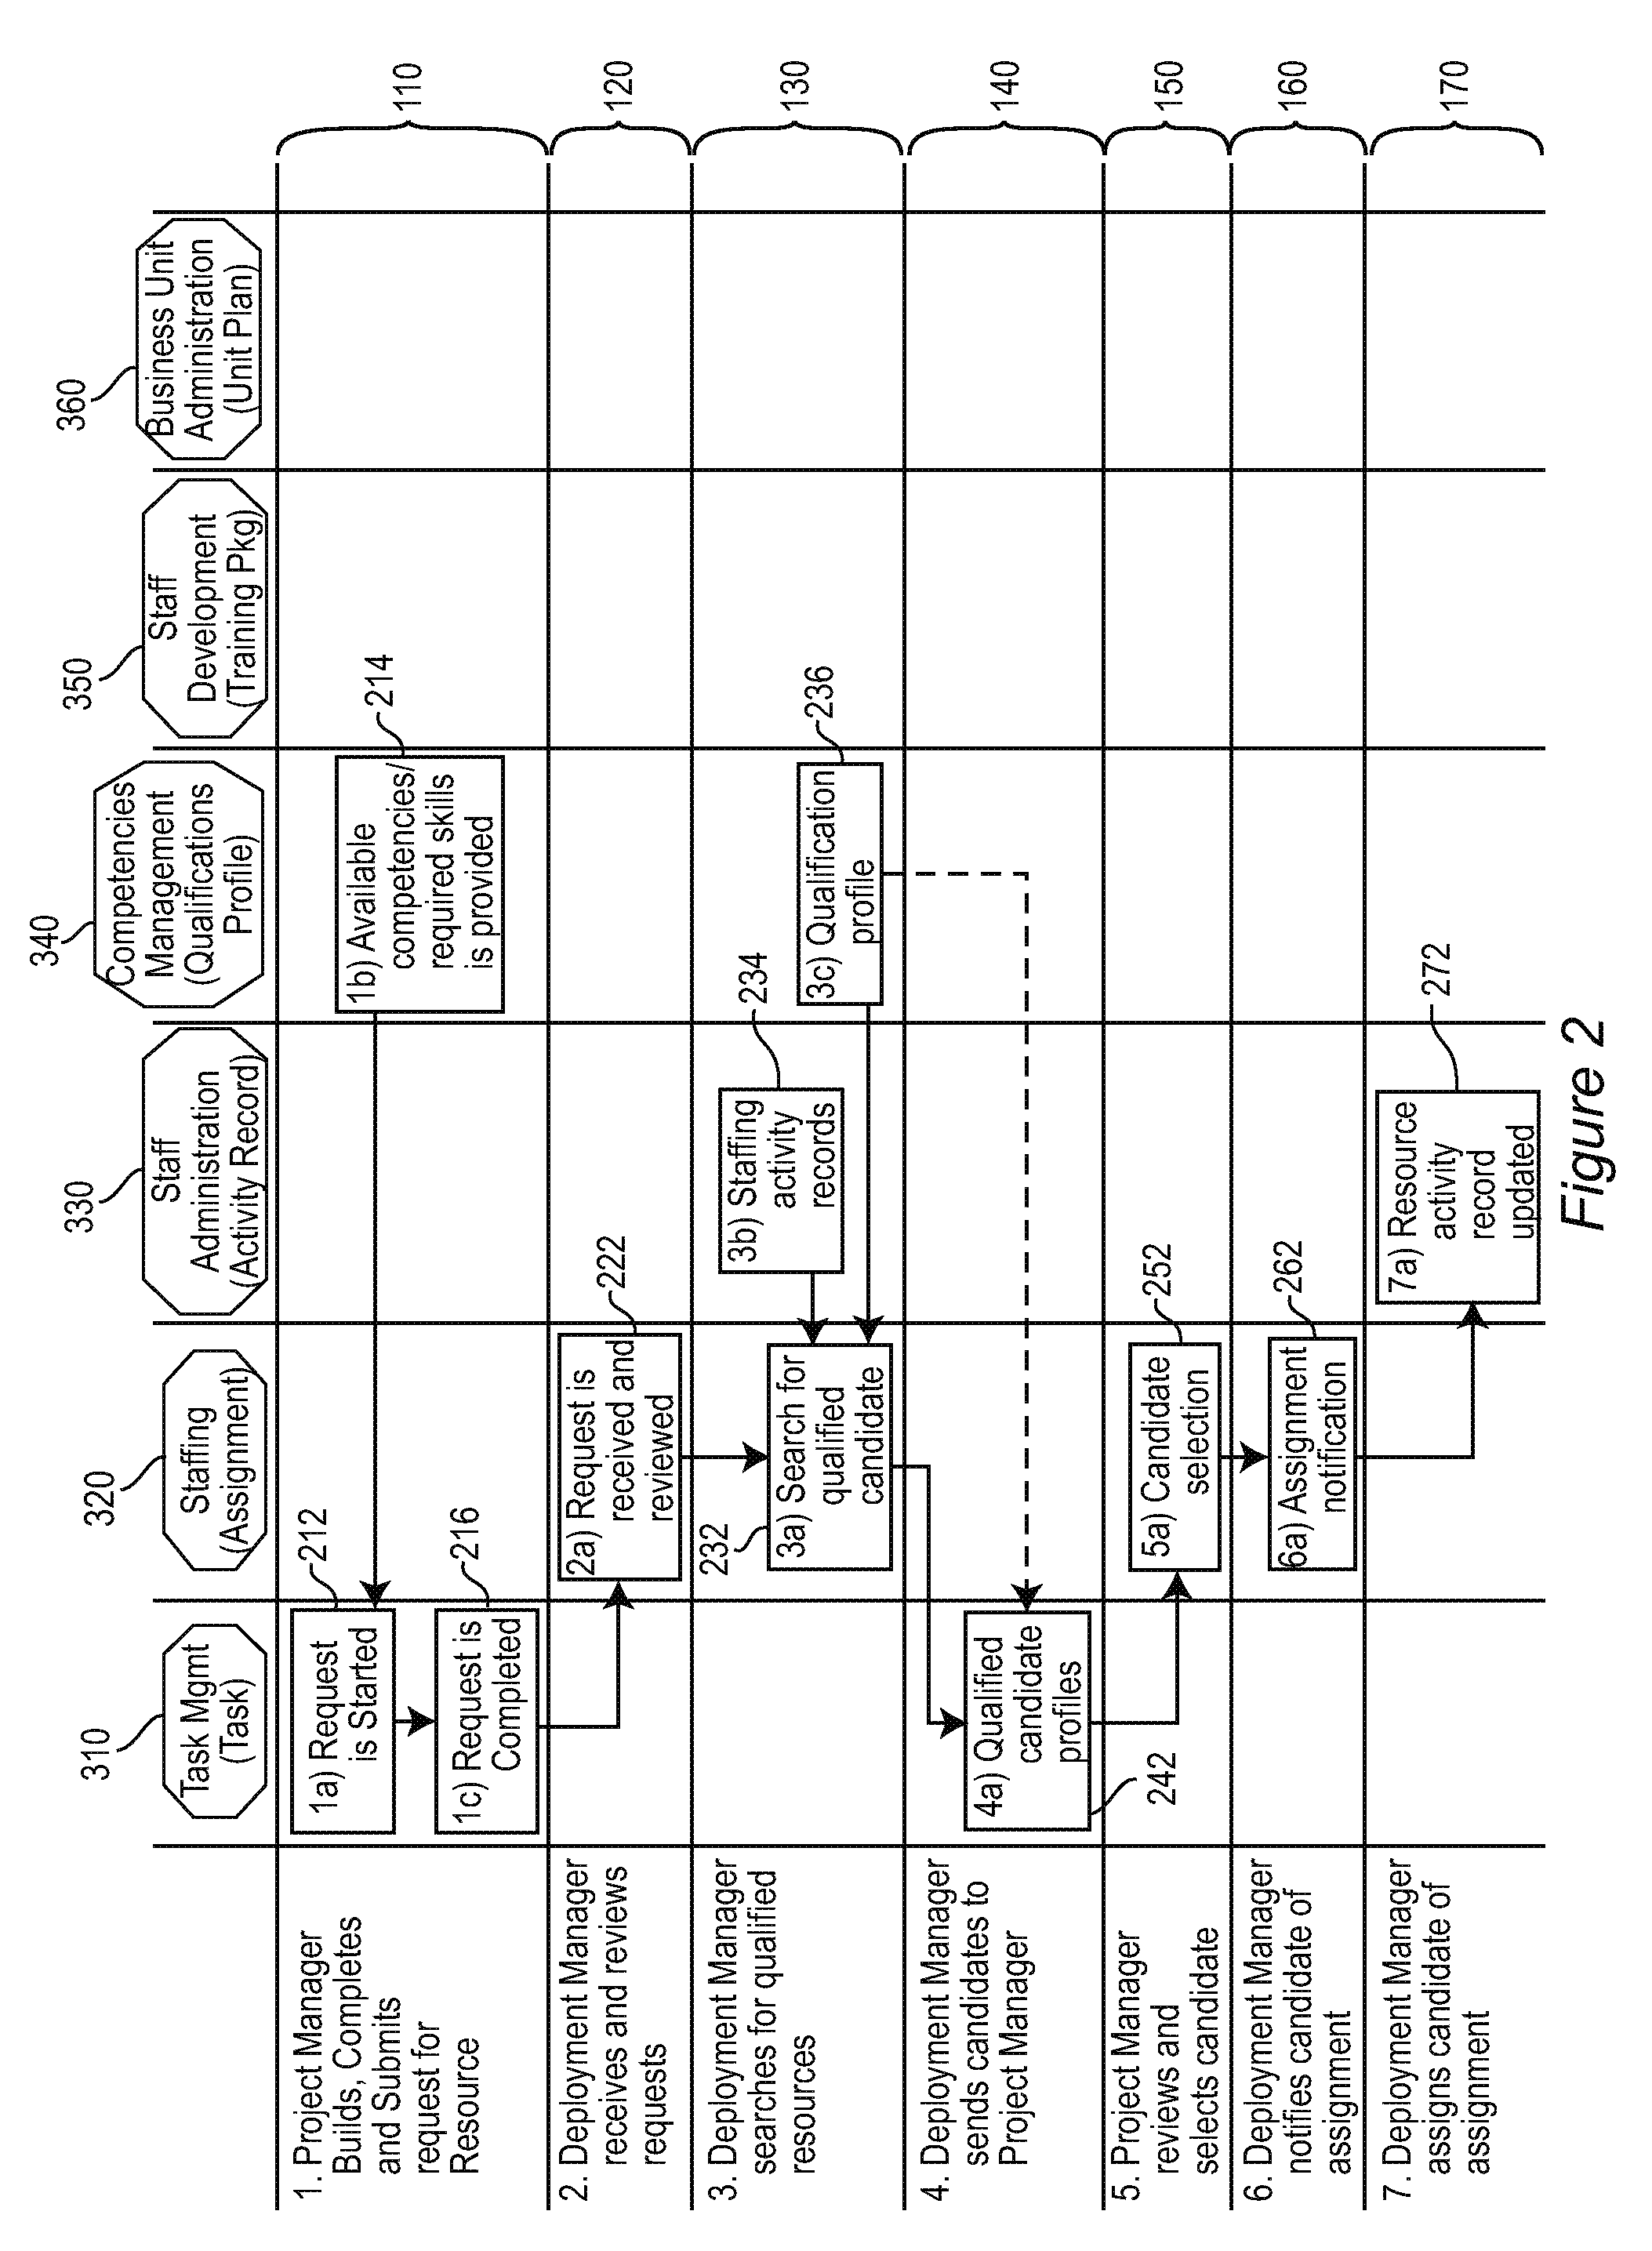 Method and system for assigning staff as a service in a service network within a component business model architecture